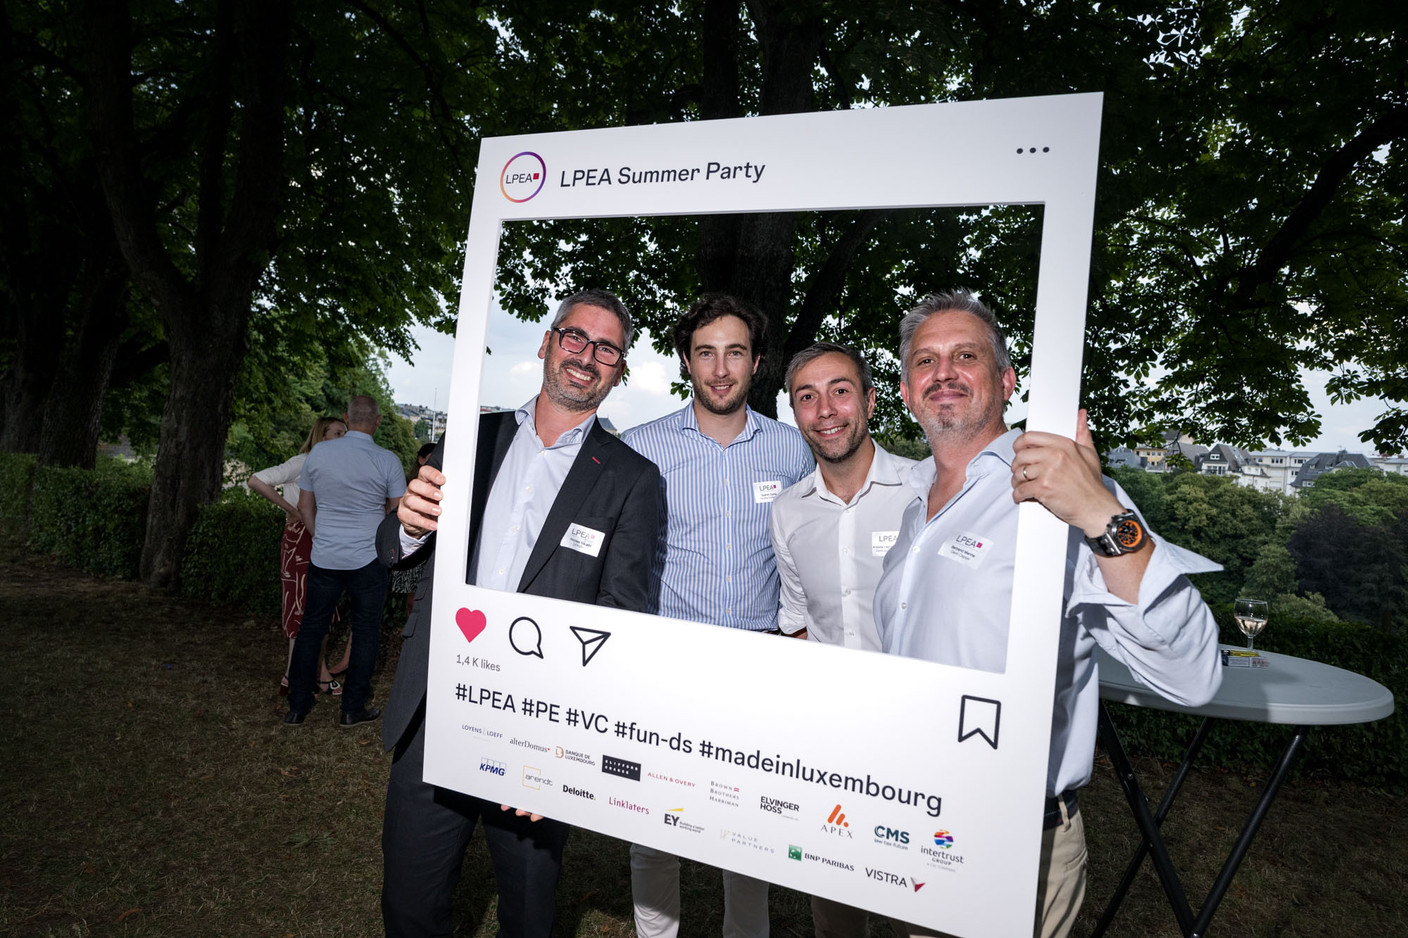 Nicolas Gauzes (Linklaters), Quentin Dupraz (Ilavska Vuillermoz Capital), Antoine Legros Saint-Jalm (Saint-Jalm Consulting) and Bertrand Manhe (Genii Capital) at the Luxembourg Private Equity and Venture Capital Association’s (LPEA) summer party, held on 11 July at the Hotel Parc Belle-Vue in Luxembourg City. Photo: Nader Ghavami